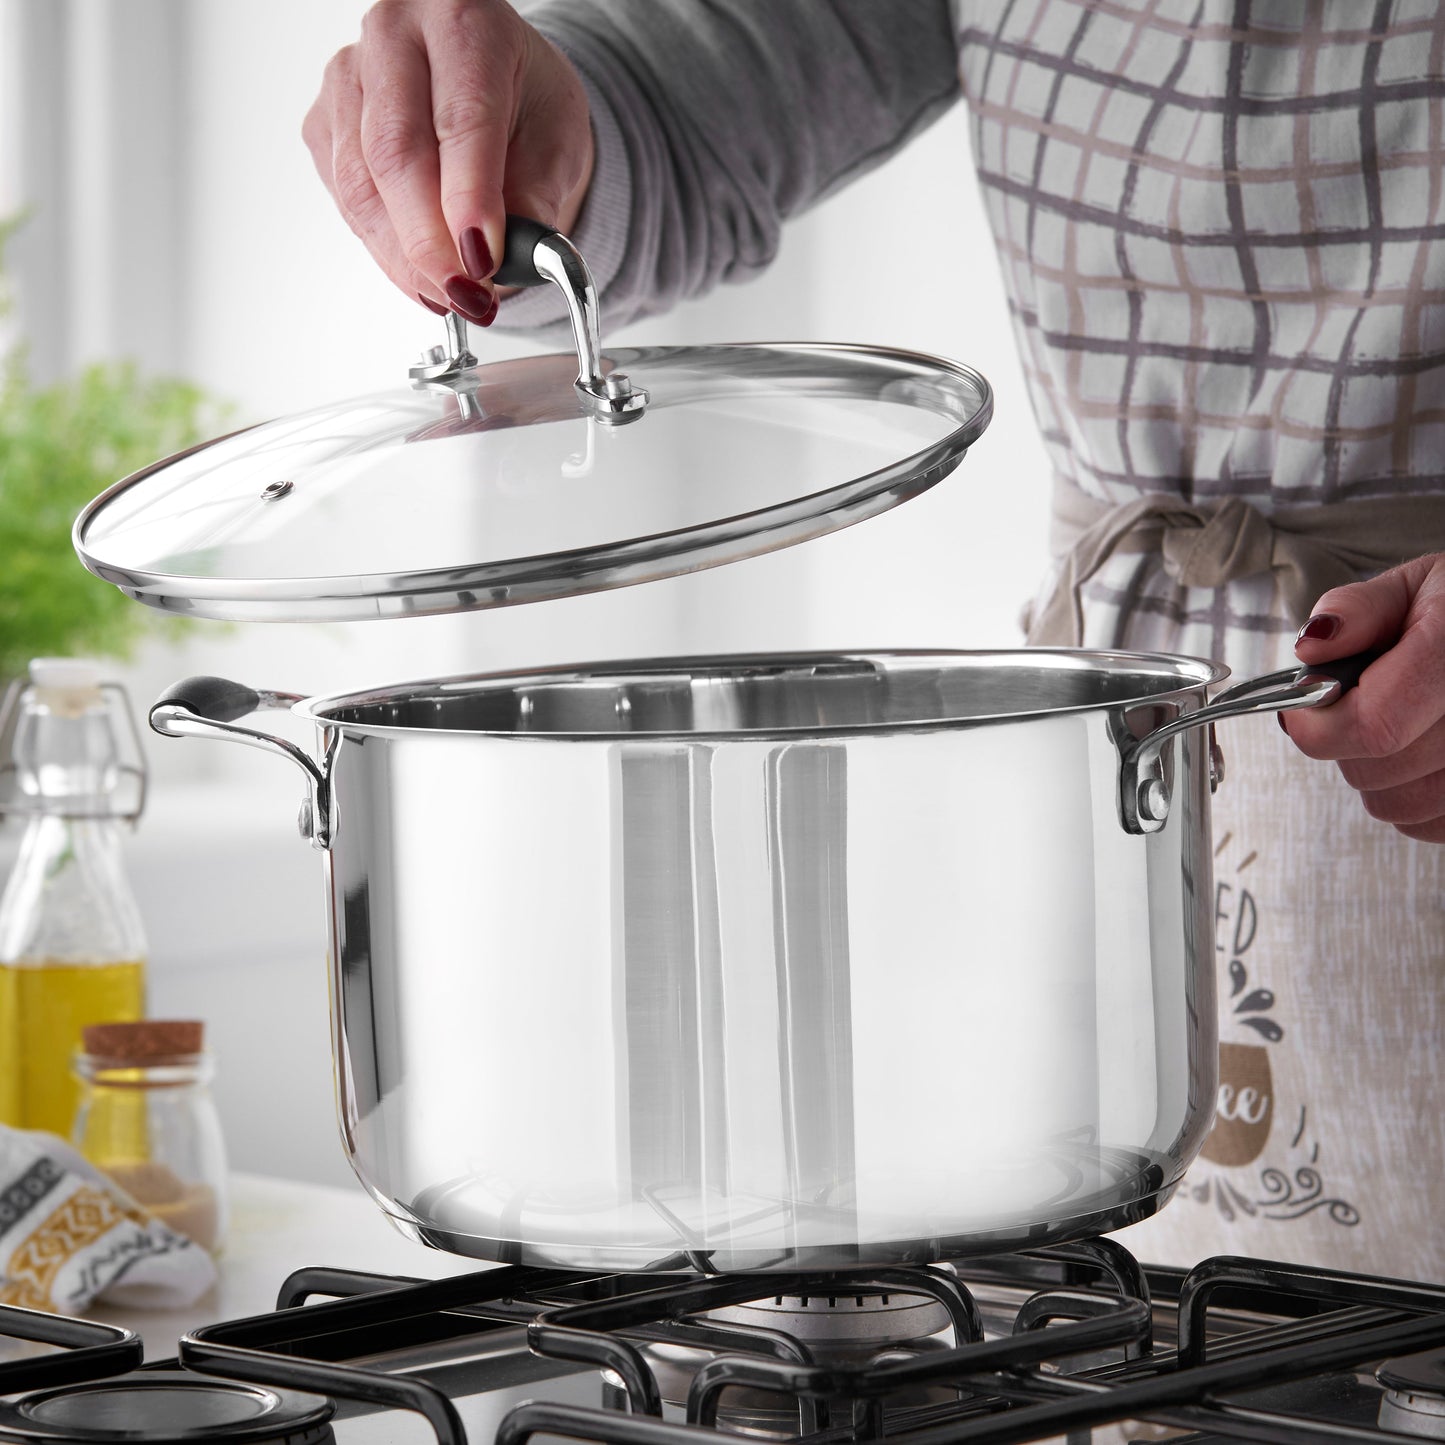 Lewis's 24cm Stainless Steel Stockpot Cooking Pot With Glass Lid Cookware